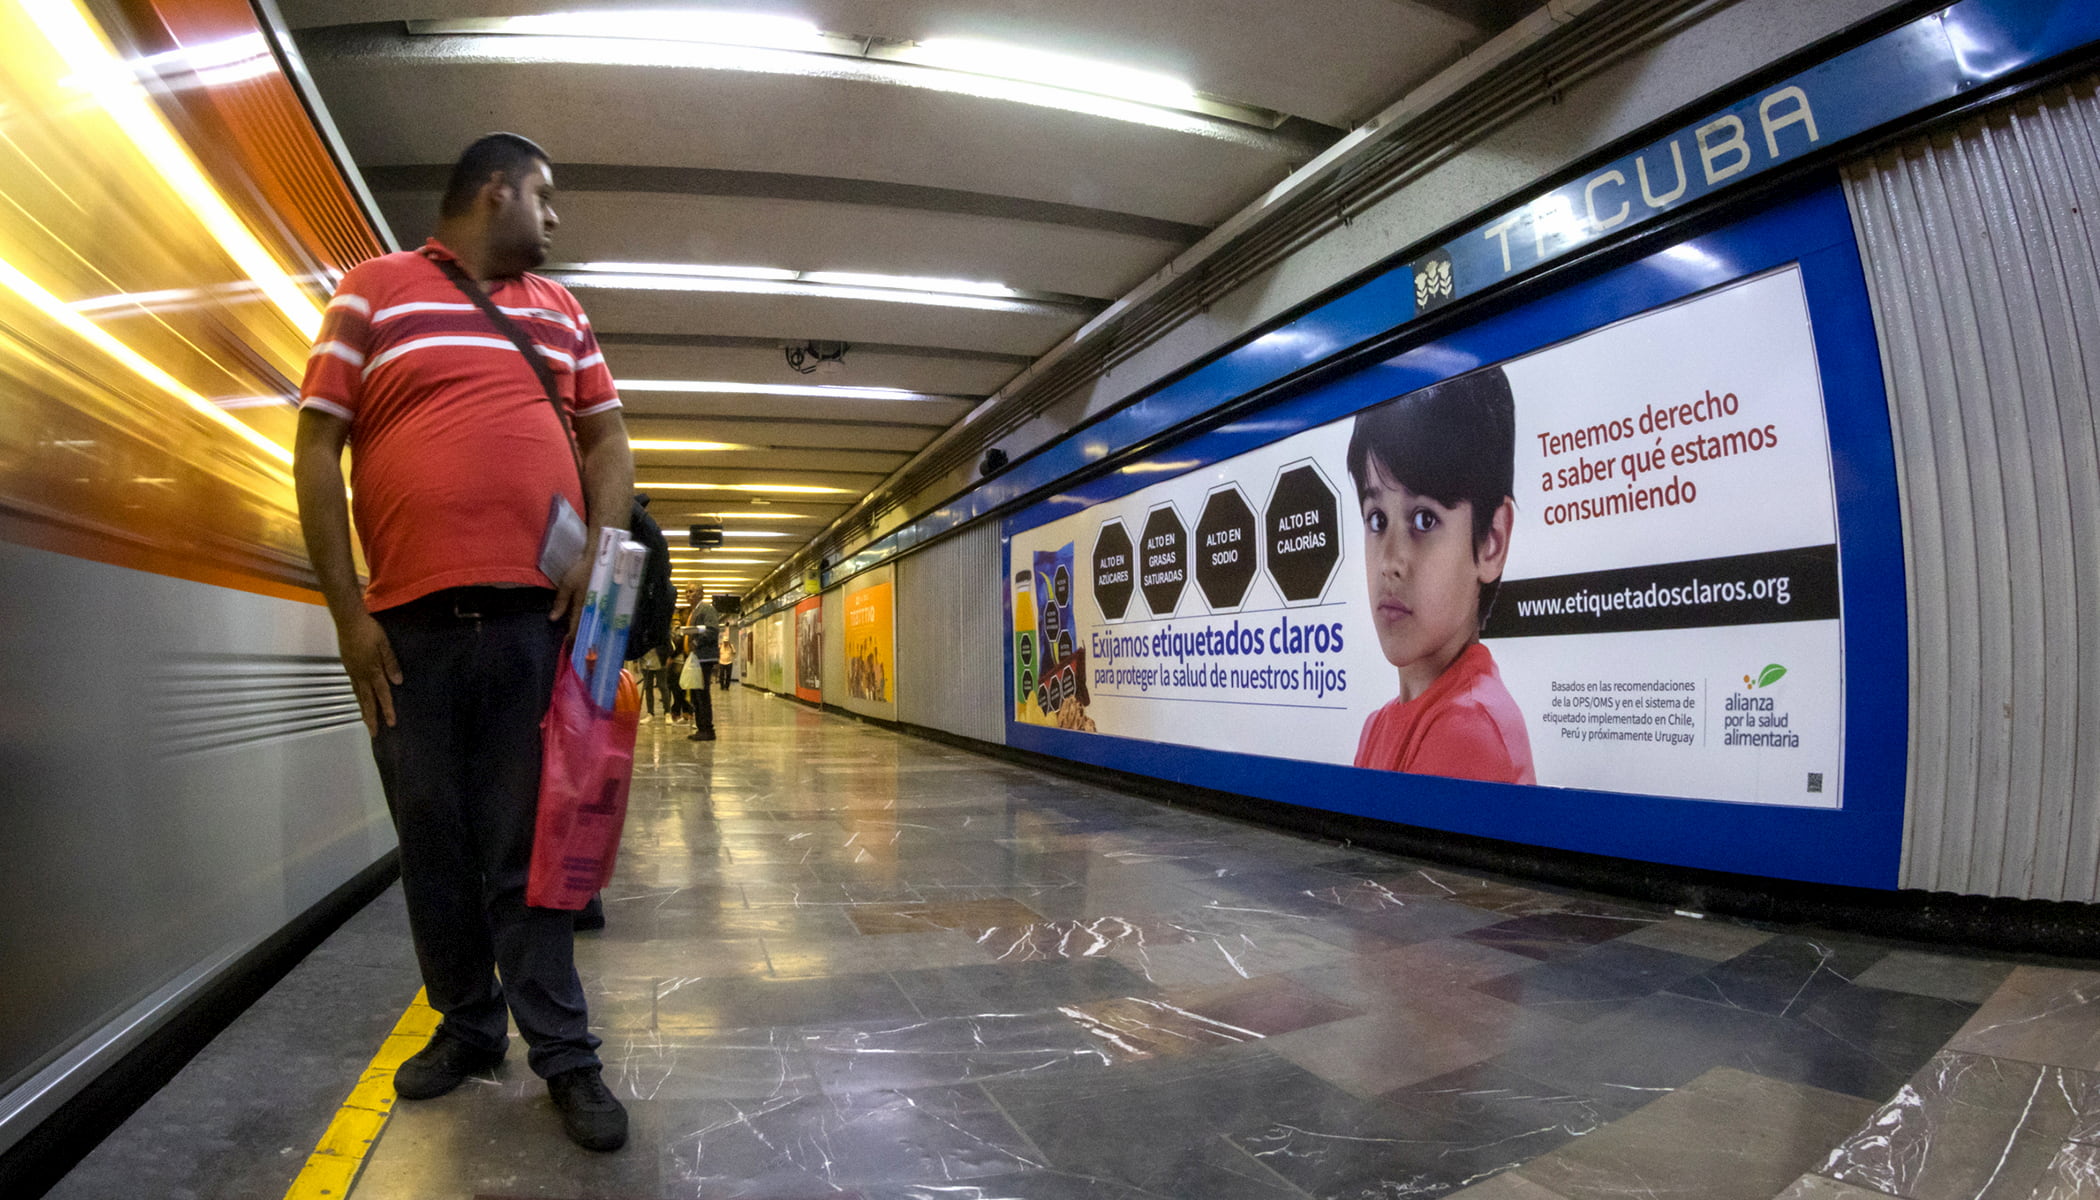 Bloomberg Philanthropies partner, The Nutritional Health Alliance's "Let's Demand Clear Labels" mass media campaign in the Mexico City subway (2019). Photo credit: Alianza por la Salud Alimentaria.